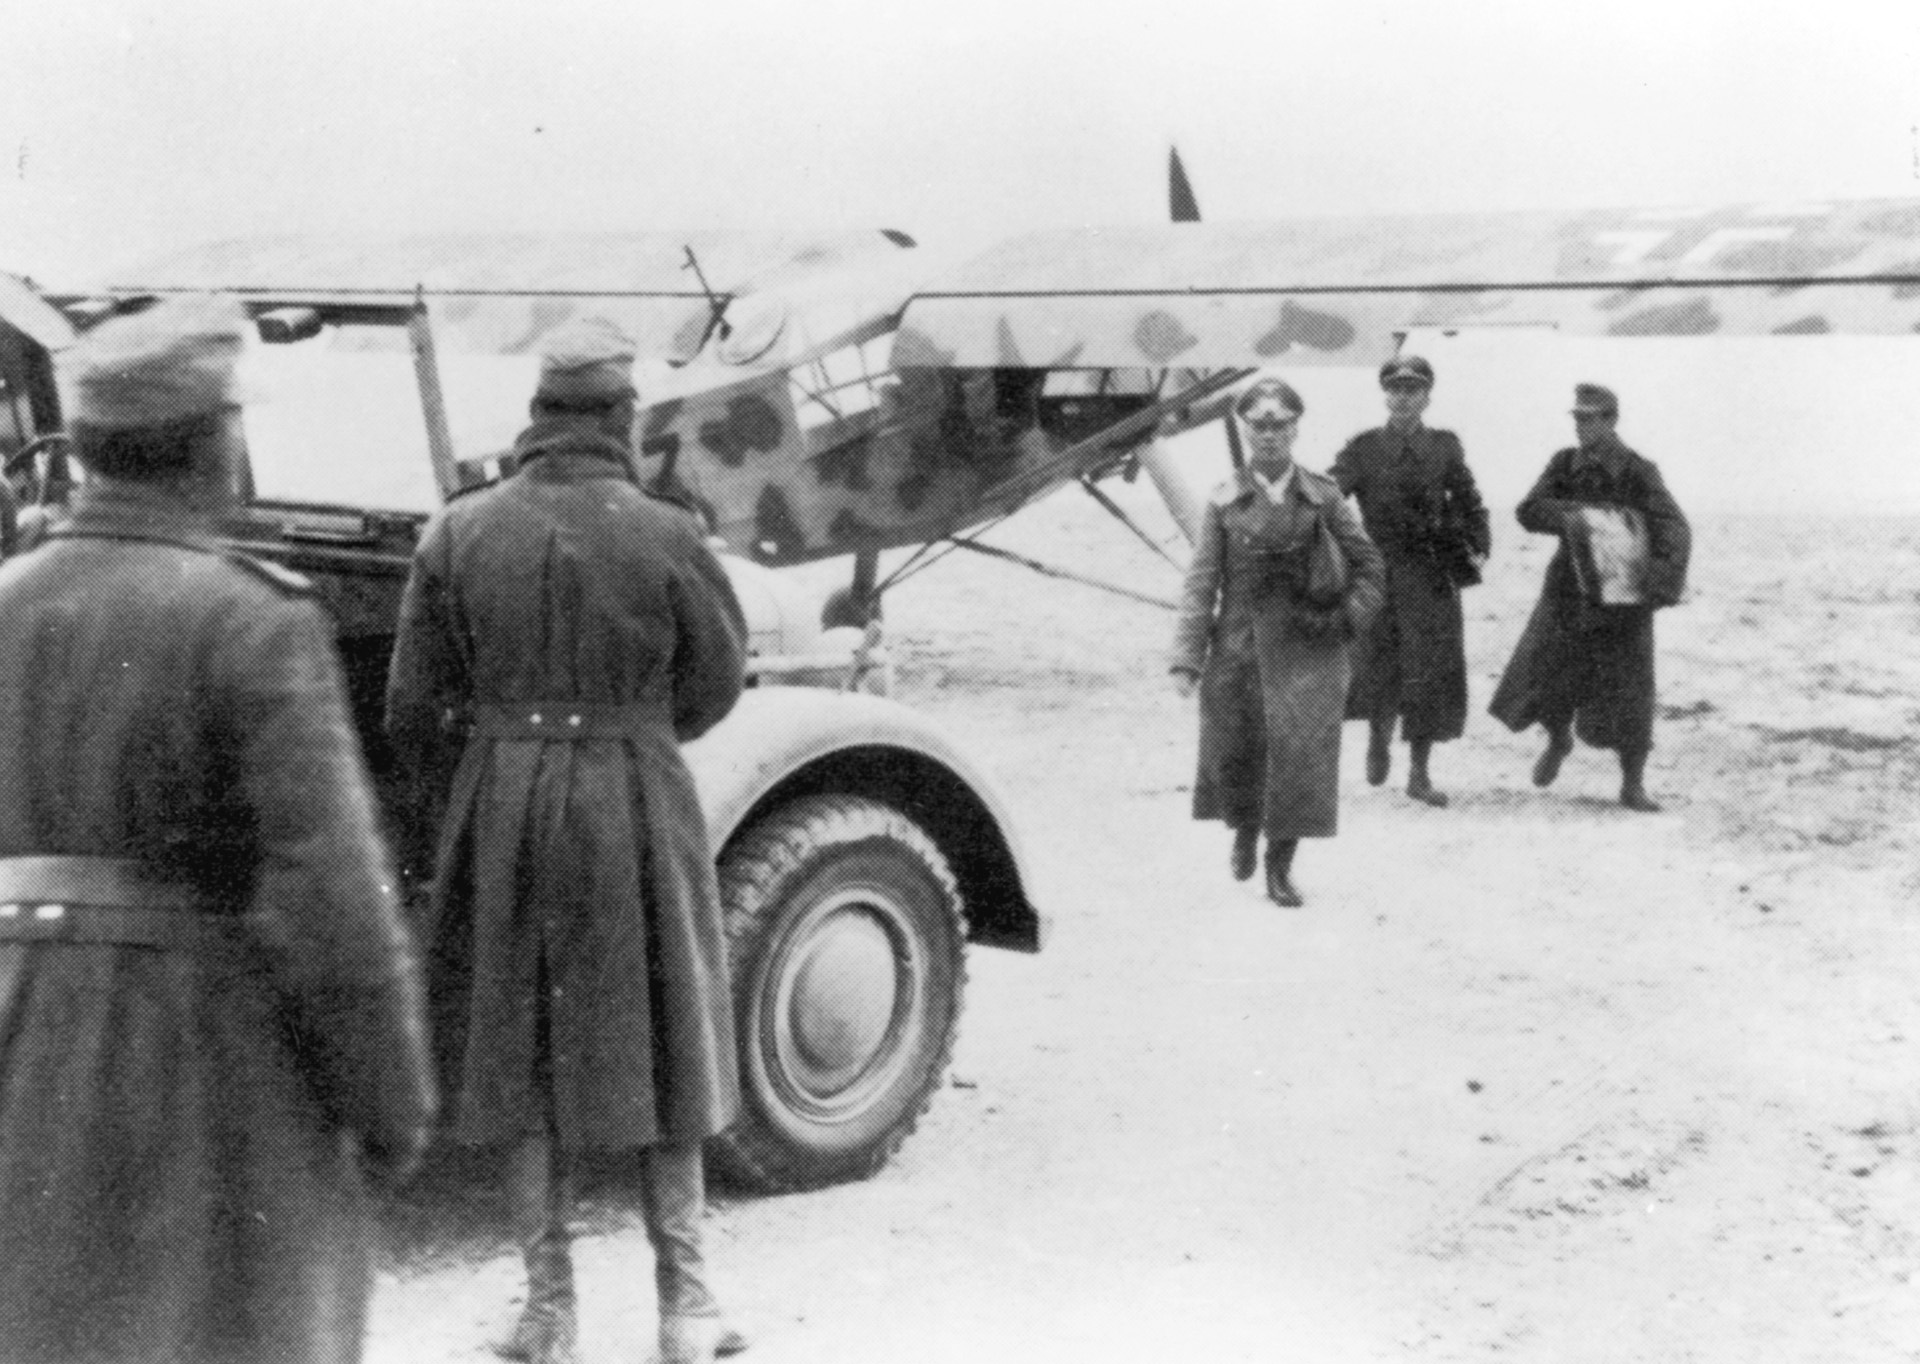 Field Marshal Rommel, followed by two aides, walks away from his command Storch. Rommel spent a great deal of time in the air and felt fortunate not to have been shot down.